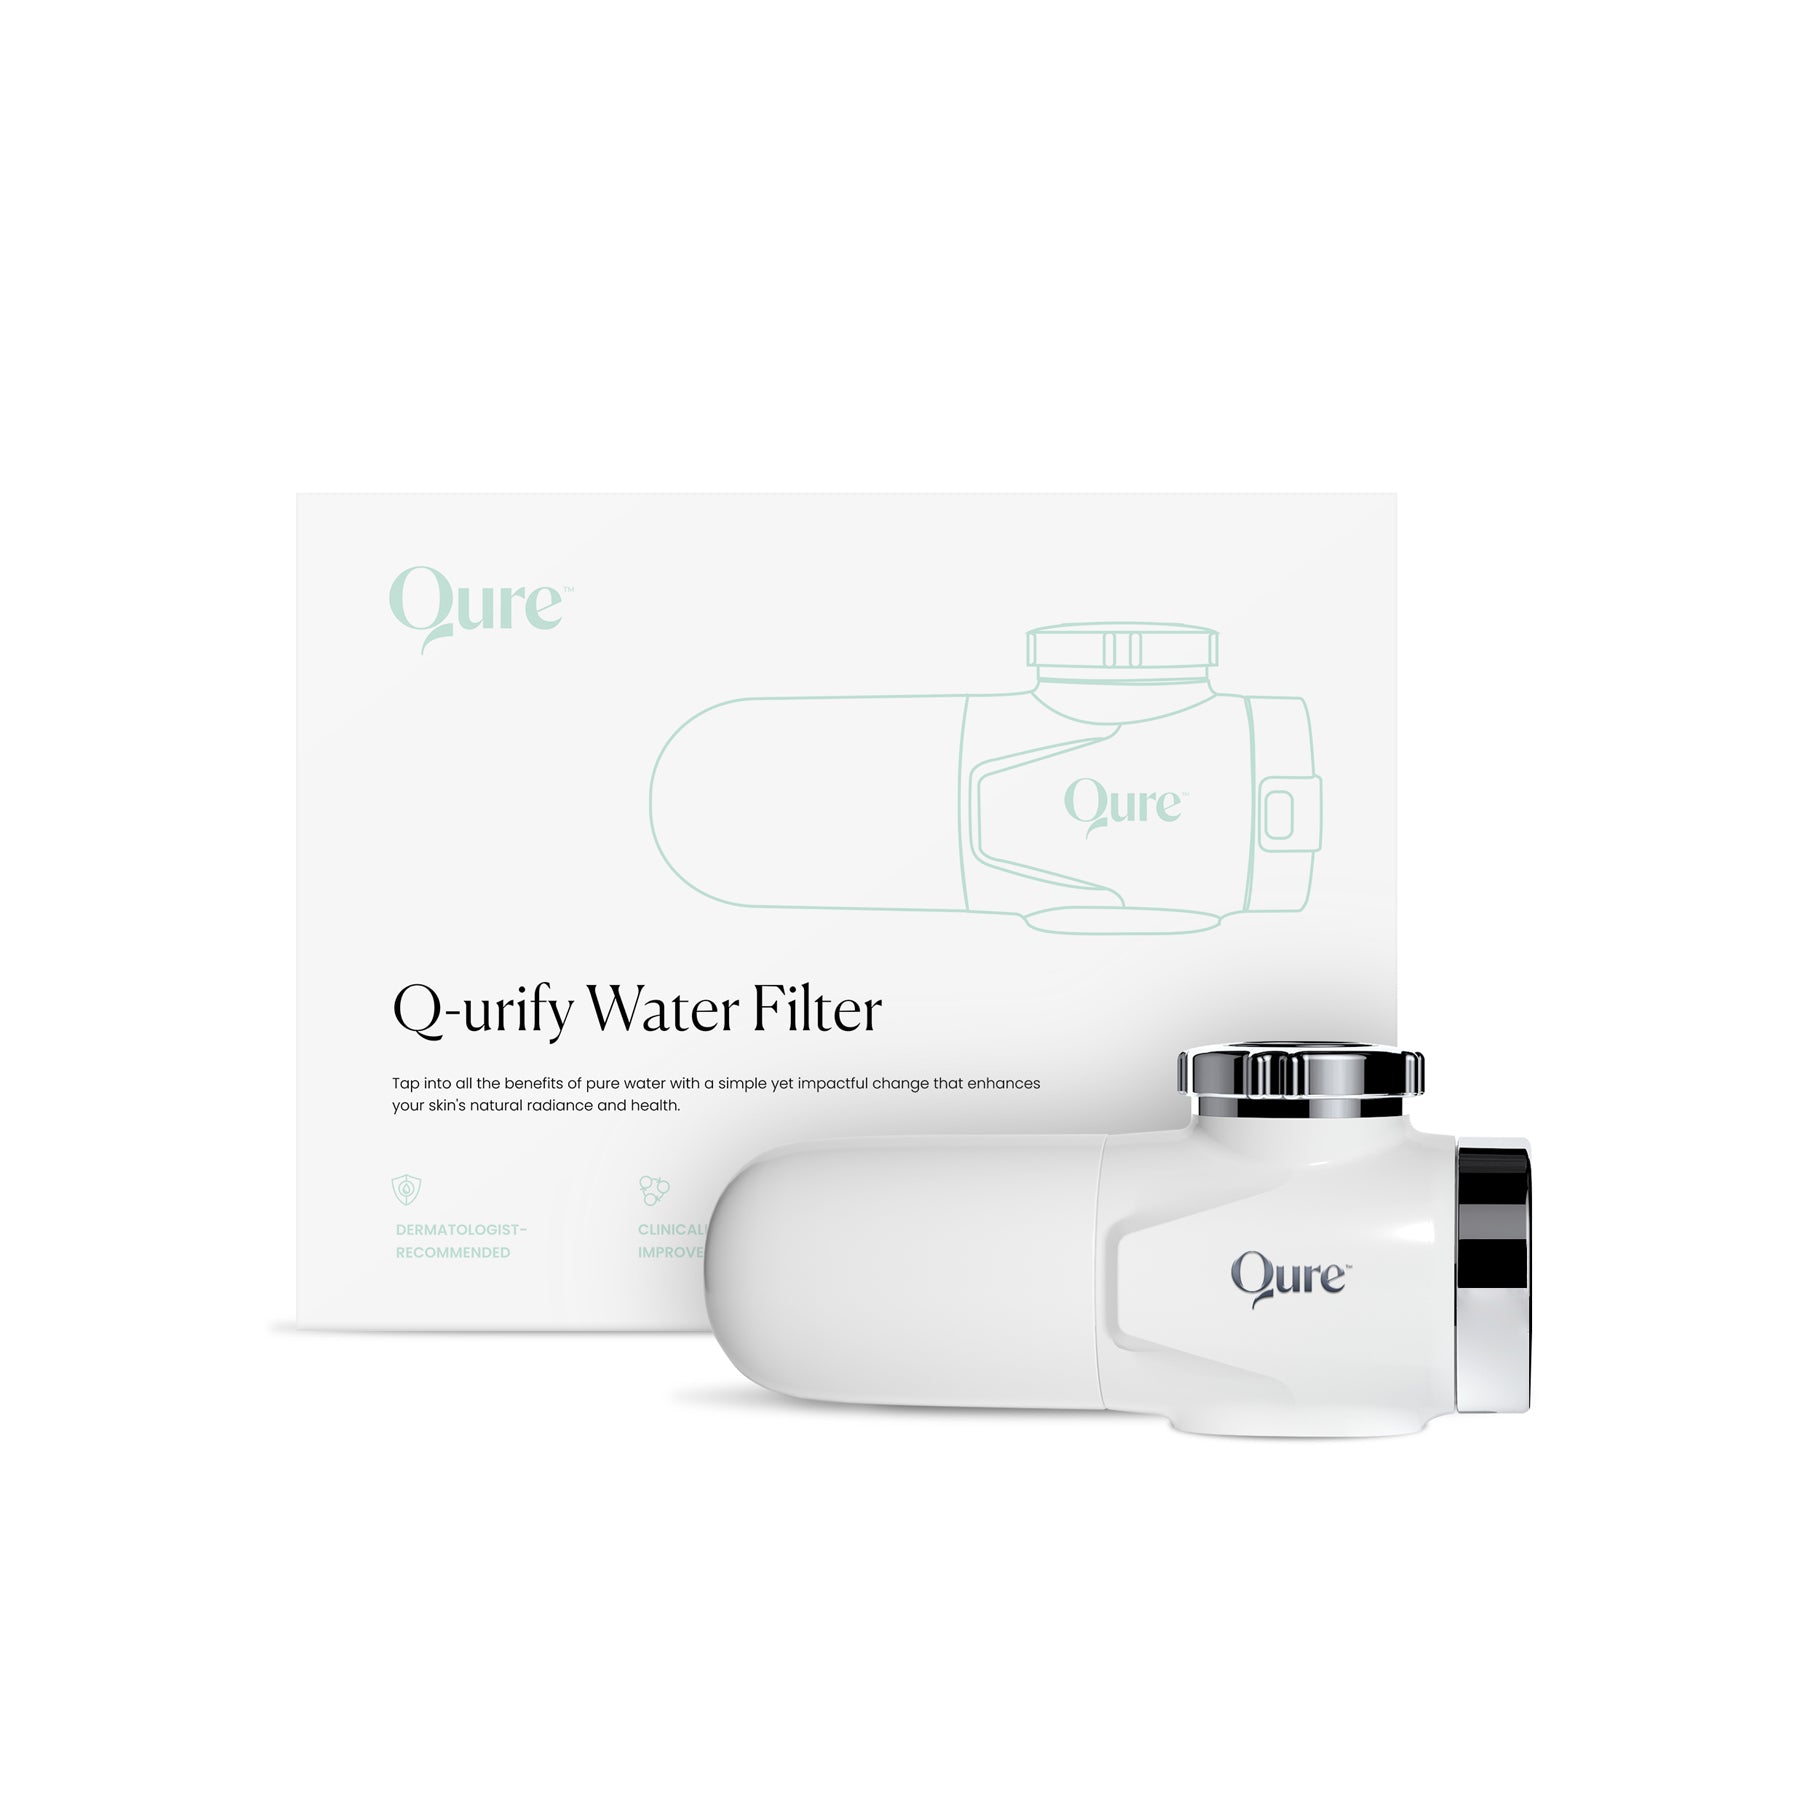 Q-urify Water Filter